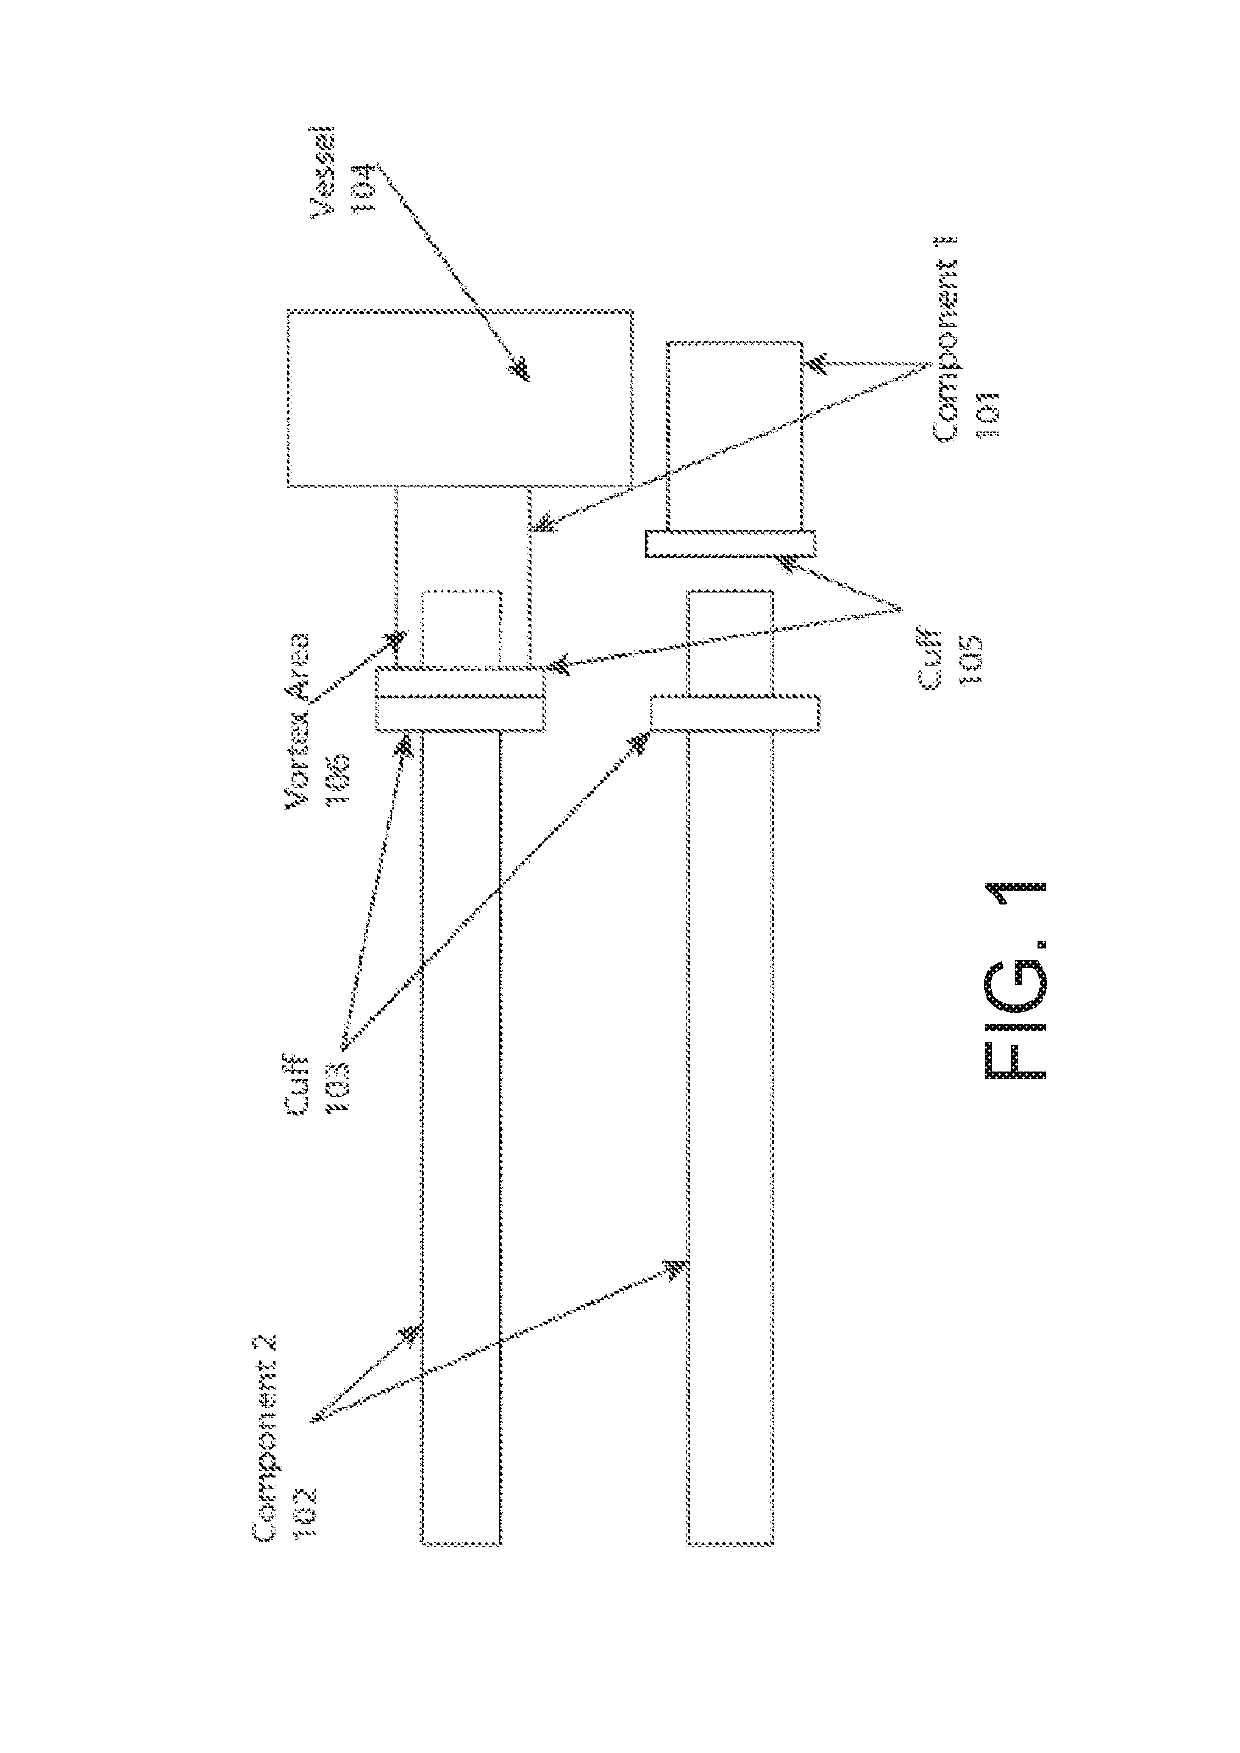 Graft anchor devices, systems and methods